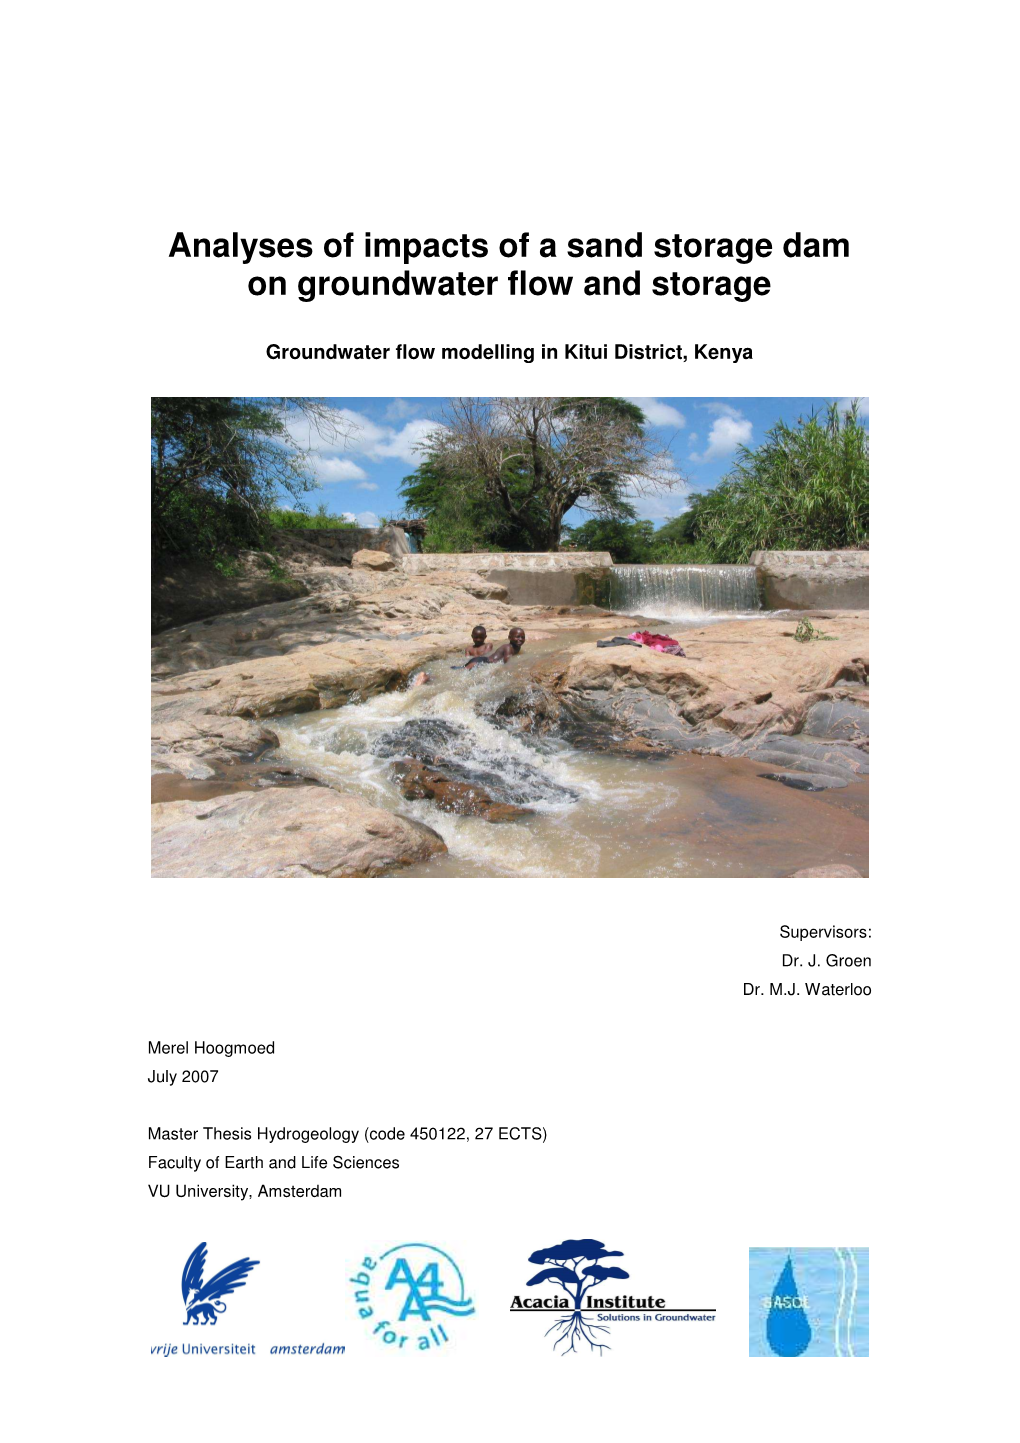 Analyses of Impacts of a Sand Storage Dam on Groundwater Flow and Storage